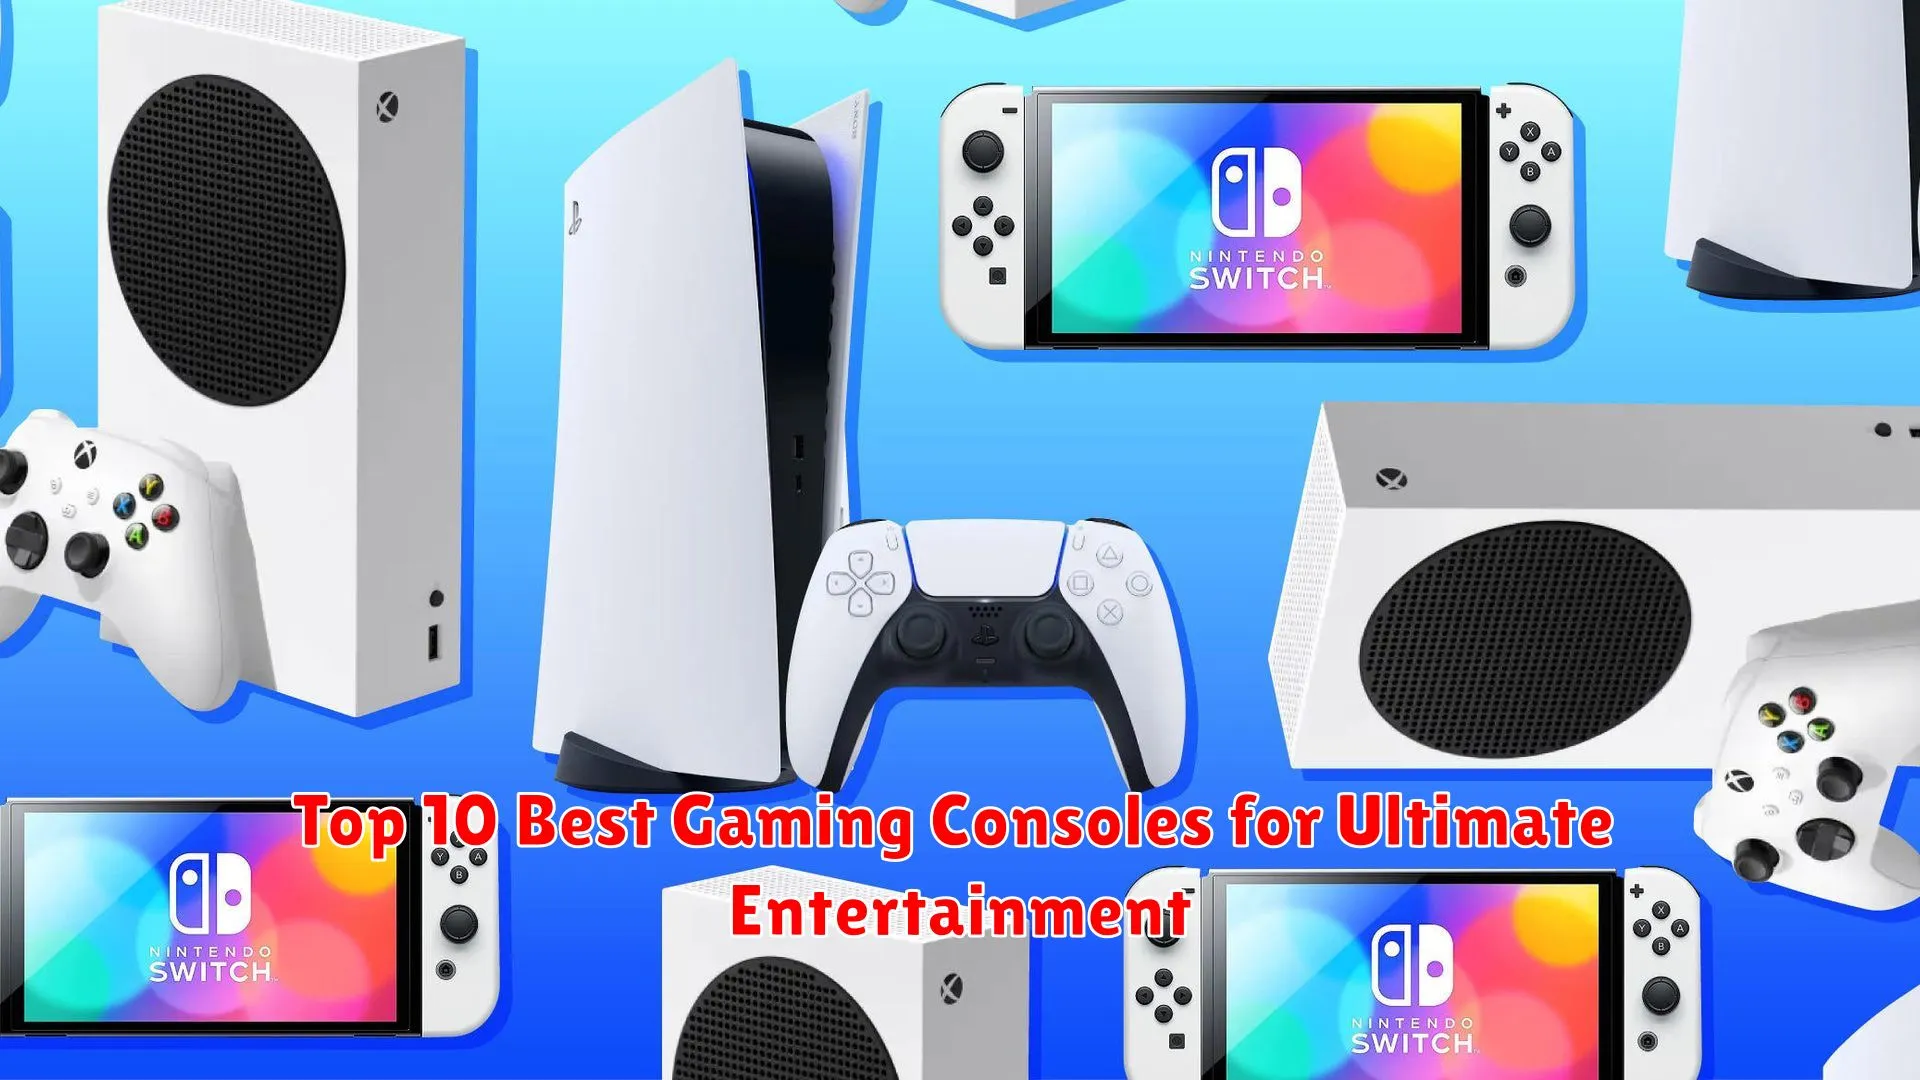 Top 10 Best Gaming Consoles for Ultimate Entertainment